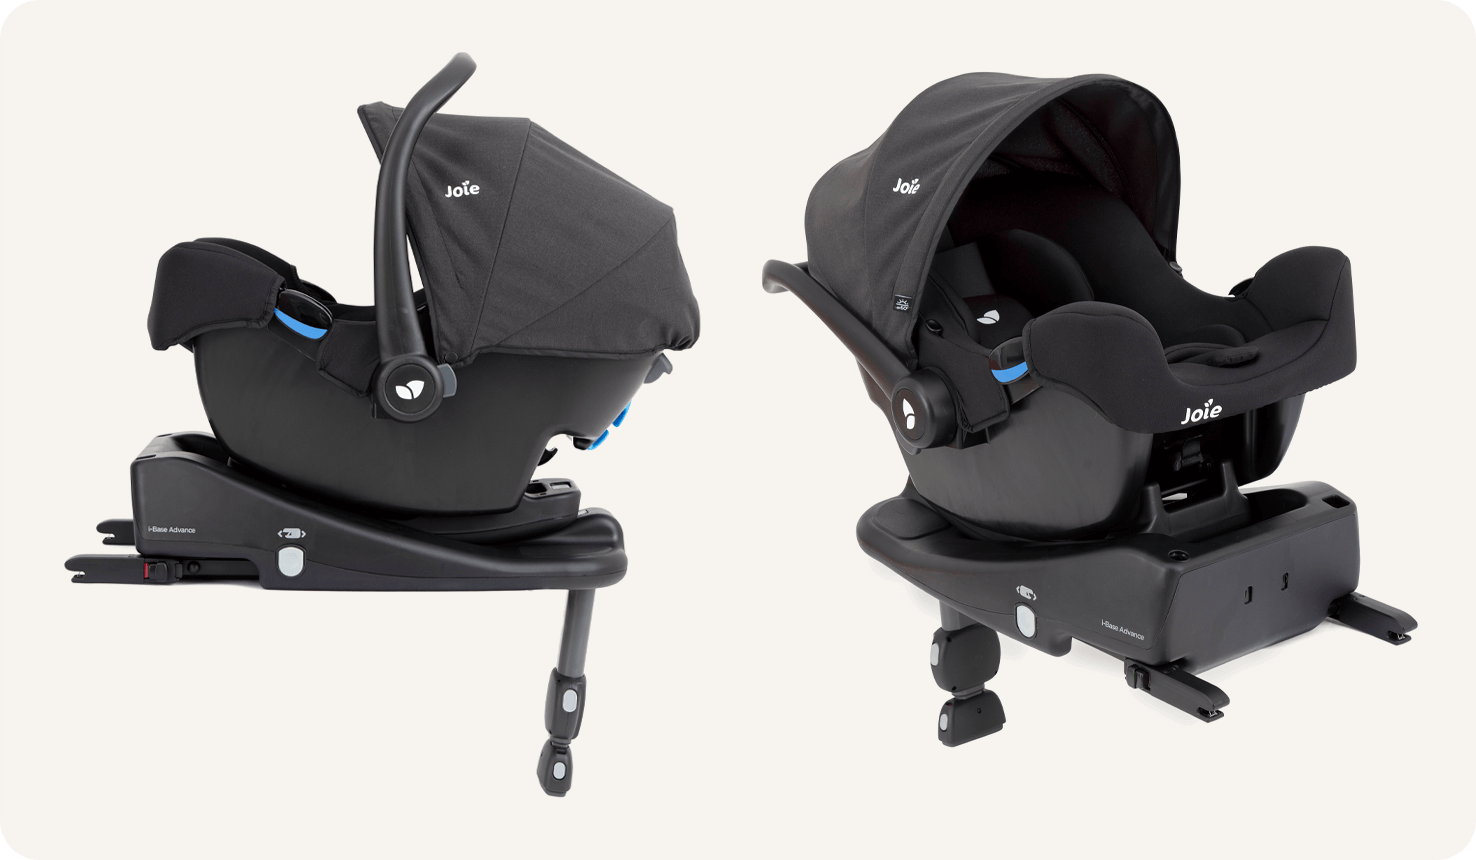  Two Joie I-Snug infant car seats side by side: left image in profile on the I-Base Advance, right image facing to the right at an angle on the I-Base Advance.